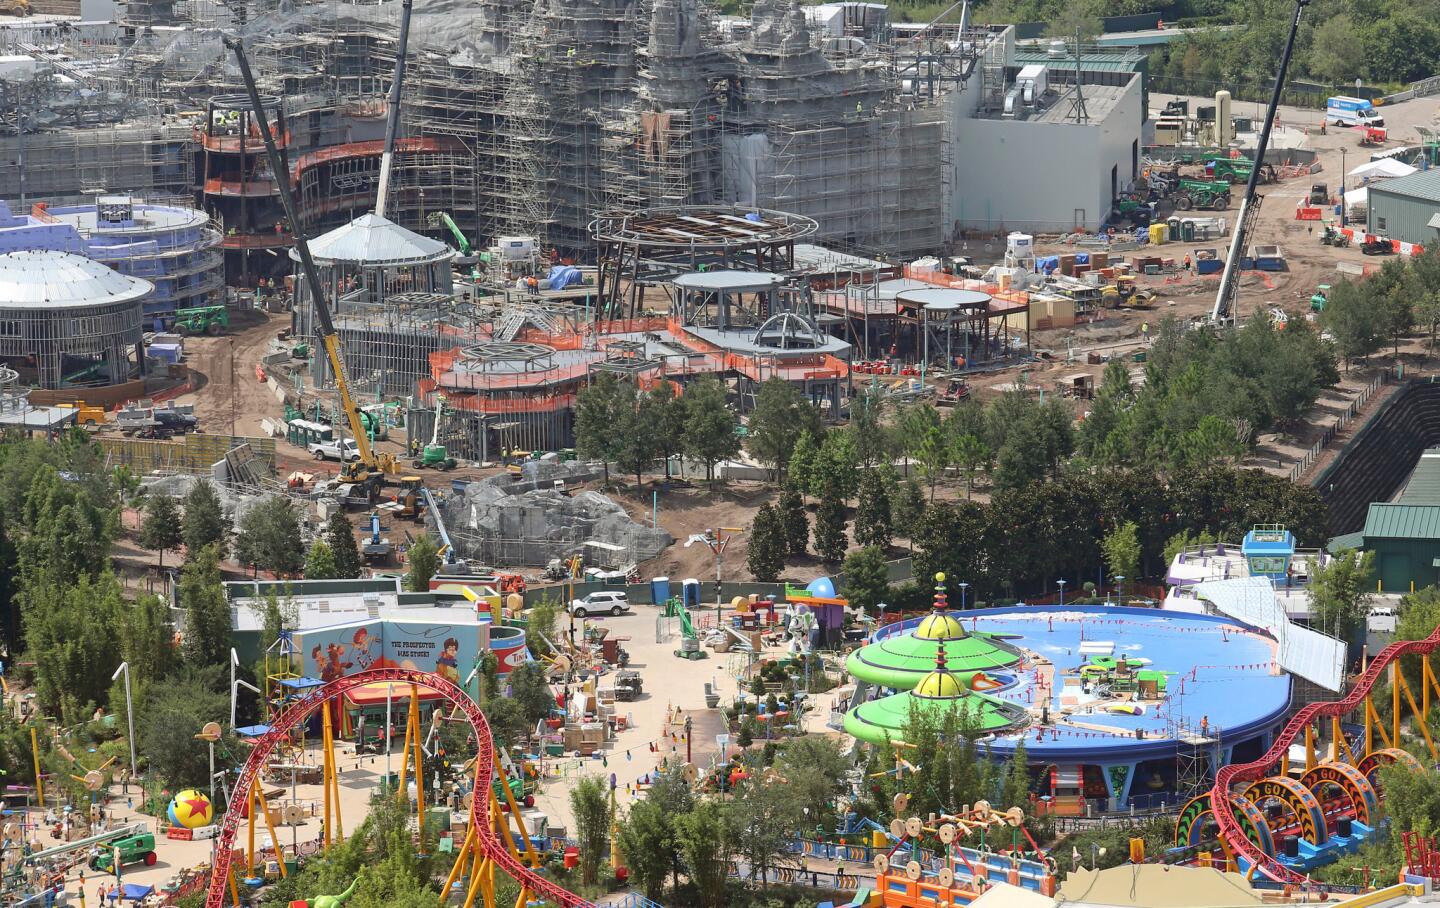 An aerial view of construction Tuesday, June 5, 2018 at Toy Story Land, foreground, and Galaxy's Edge an upcoming Star Wars-themed area both being developed at Disney's Hollywood Studios at Walt Disney World in Orlando, Florida.(Red Huber/Staff Photographer)